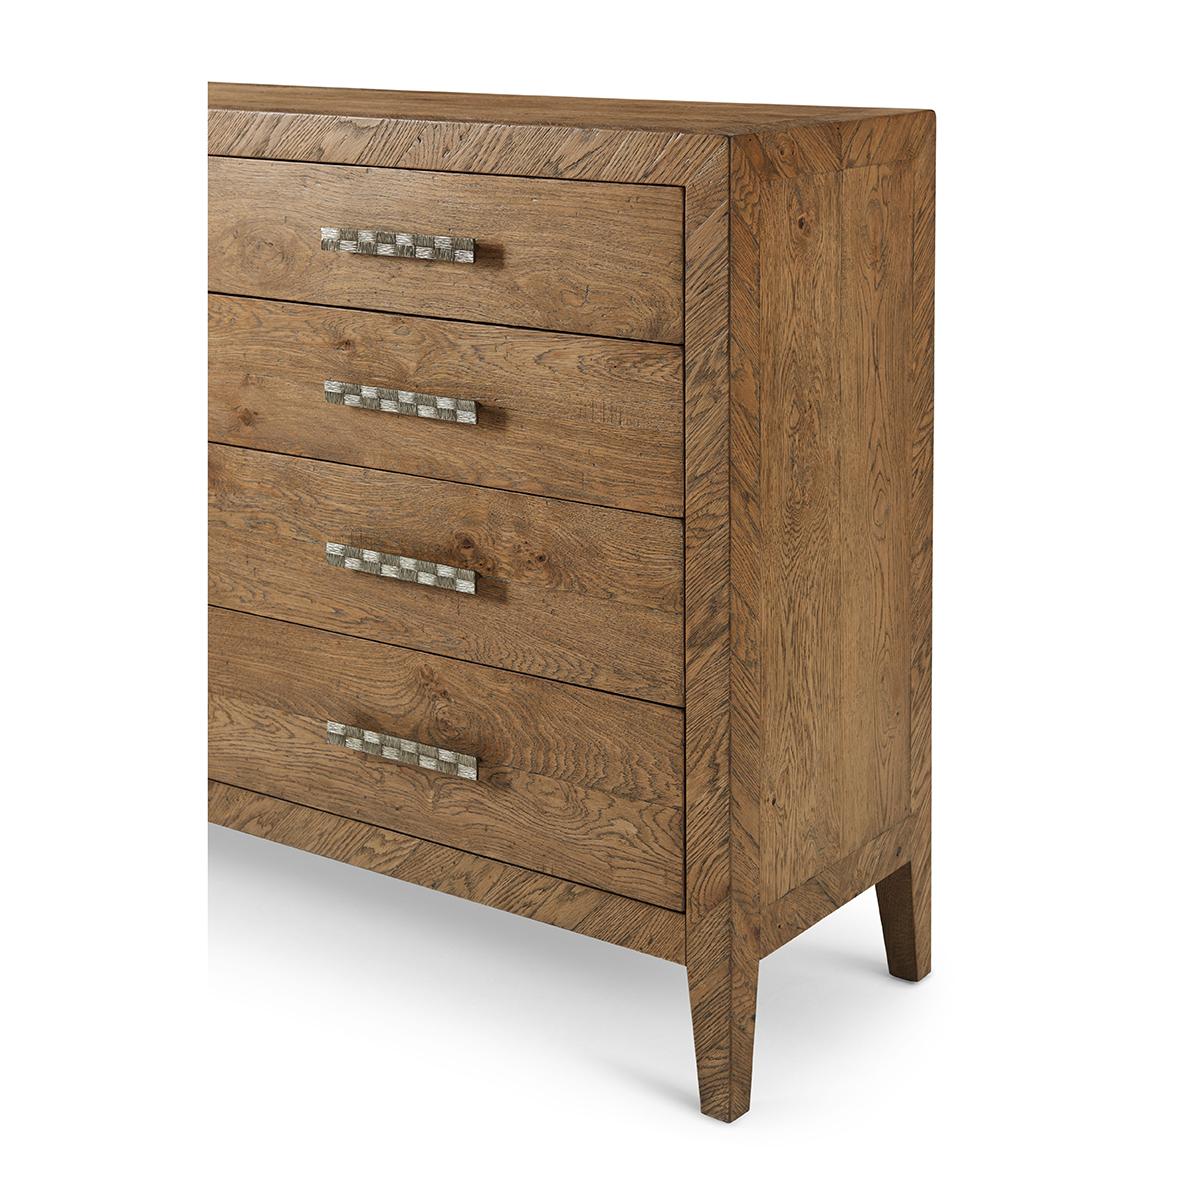 Contemporary Southern Rustic Dresser For Sale